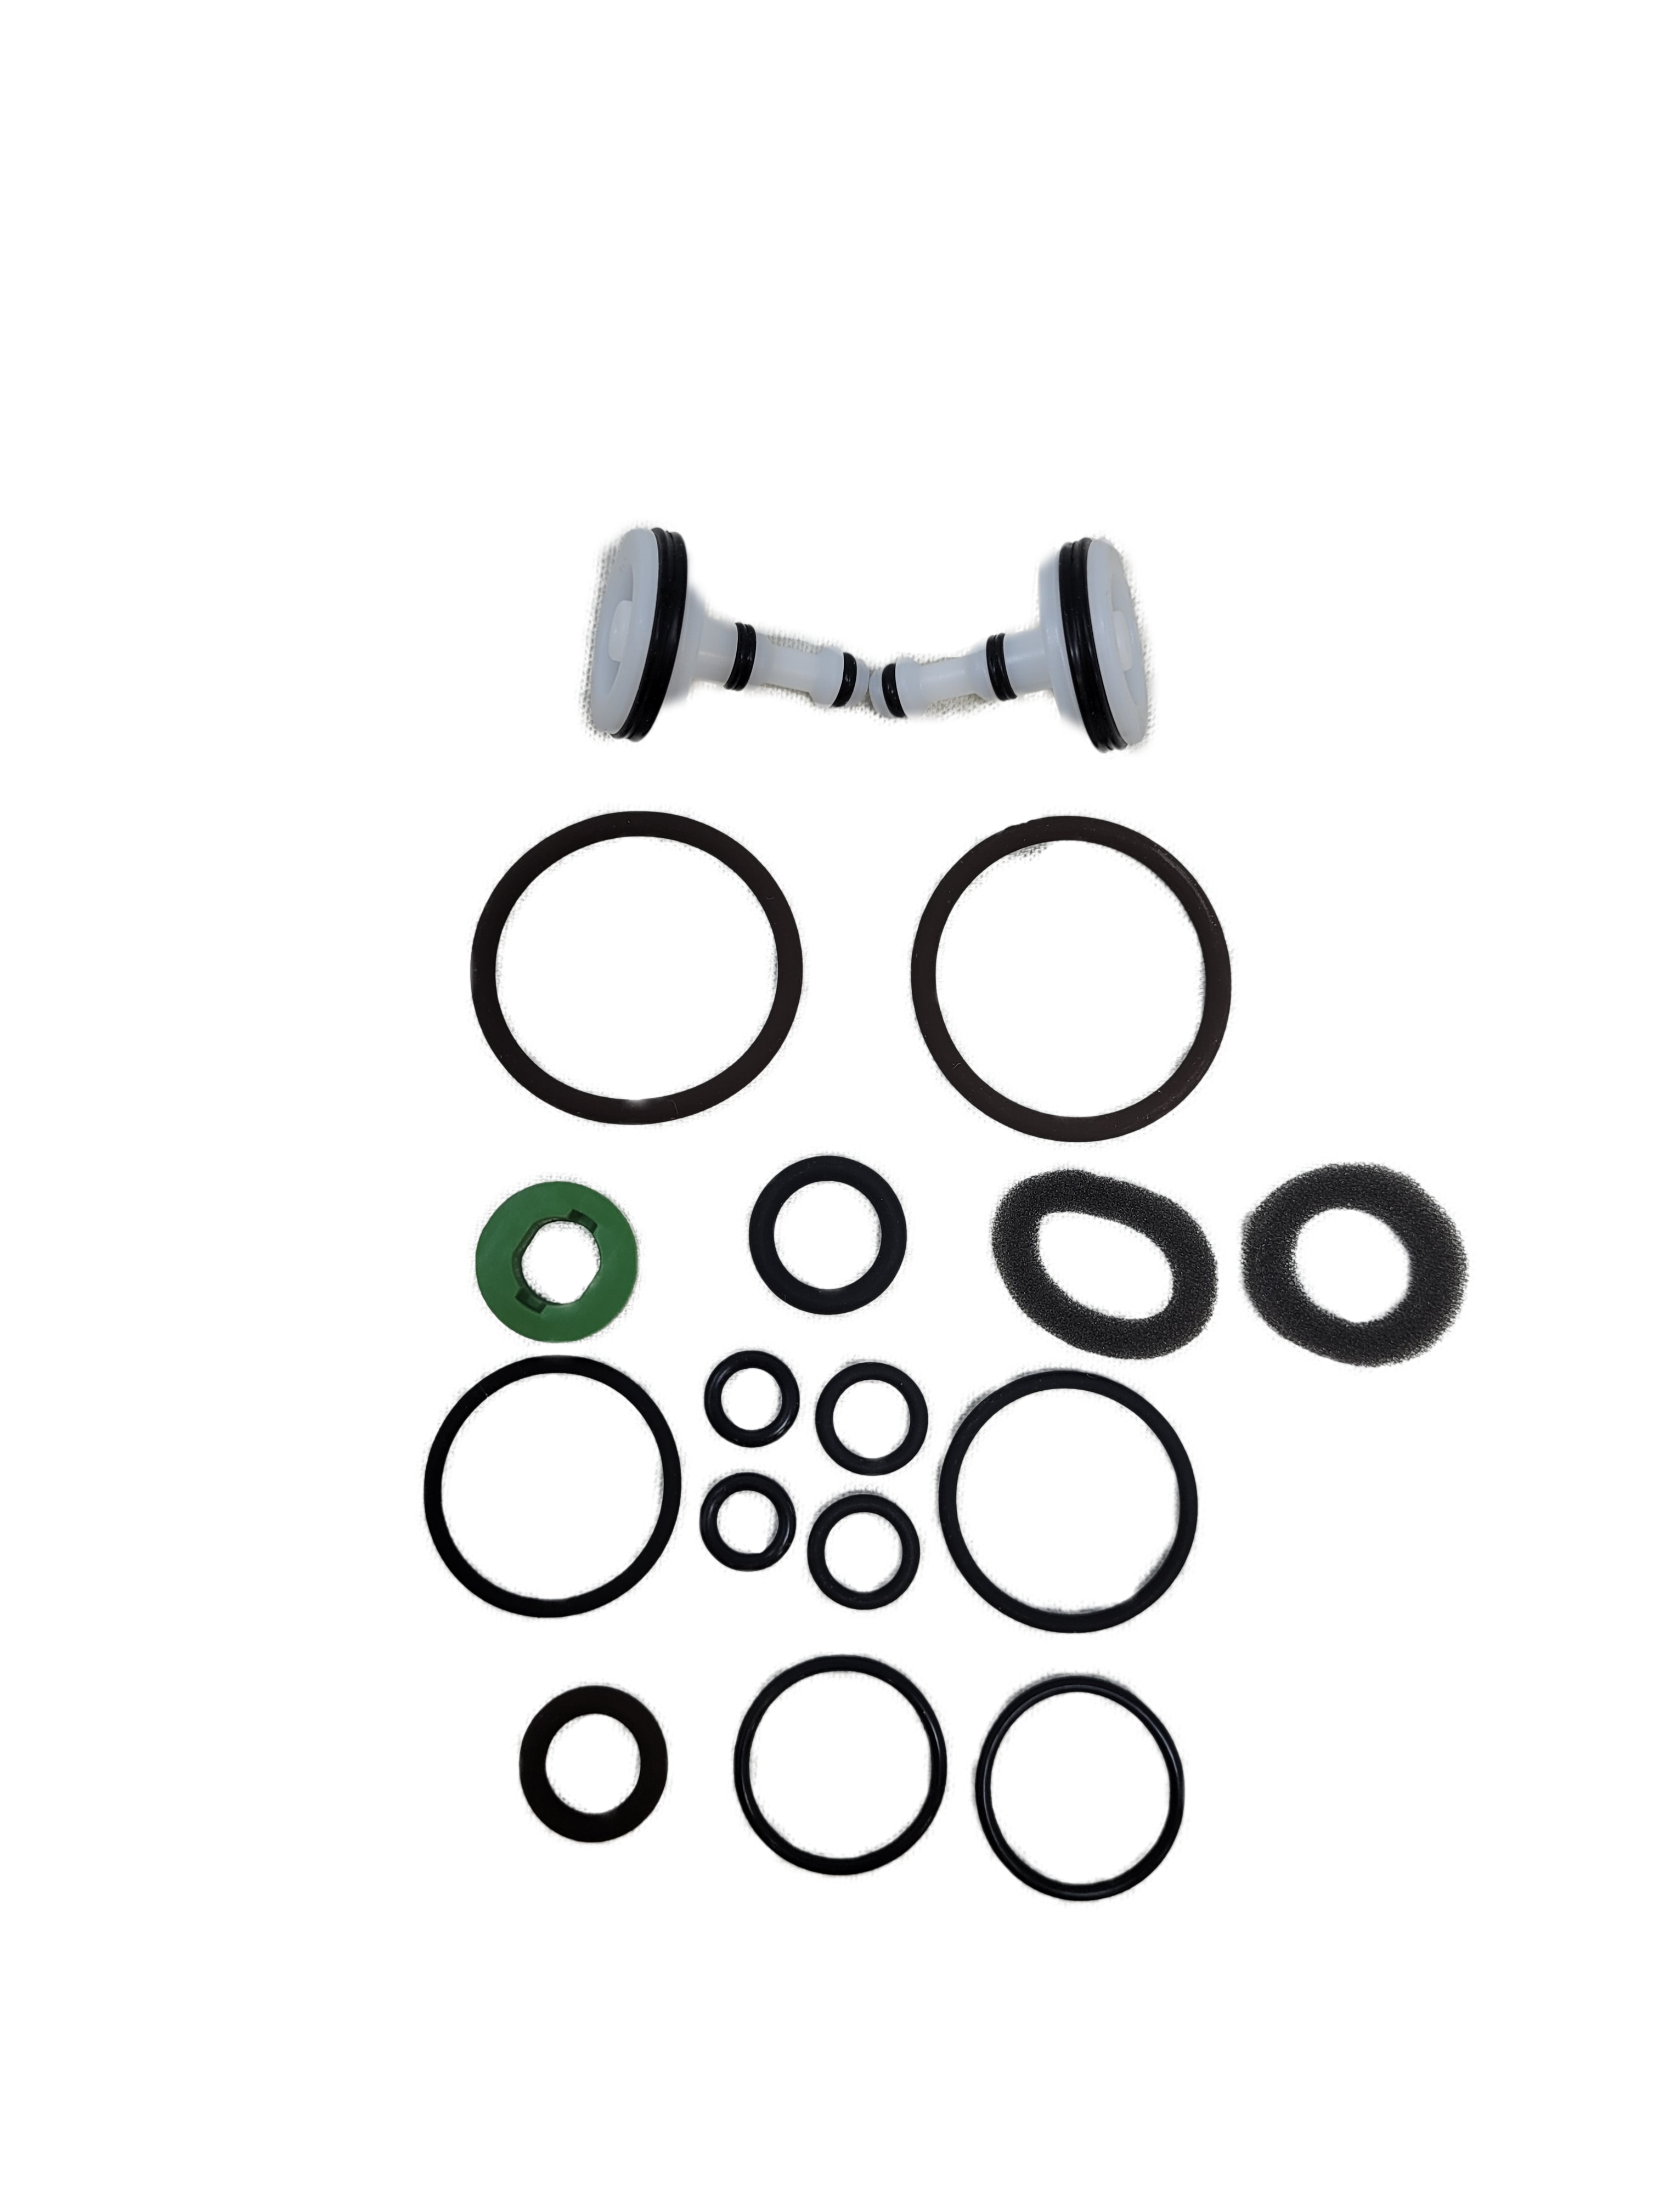 O-ring and Piston Sub-Assembly Kit